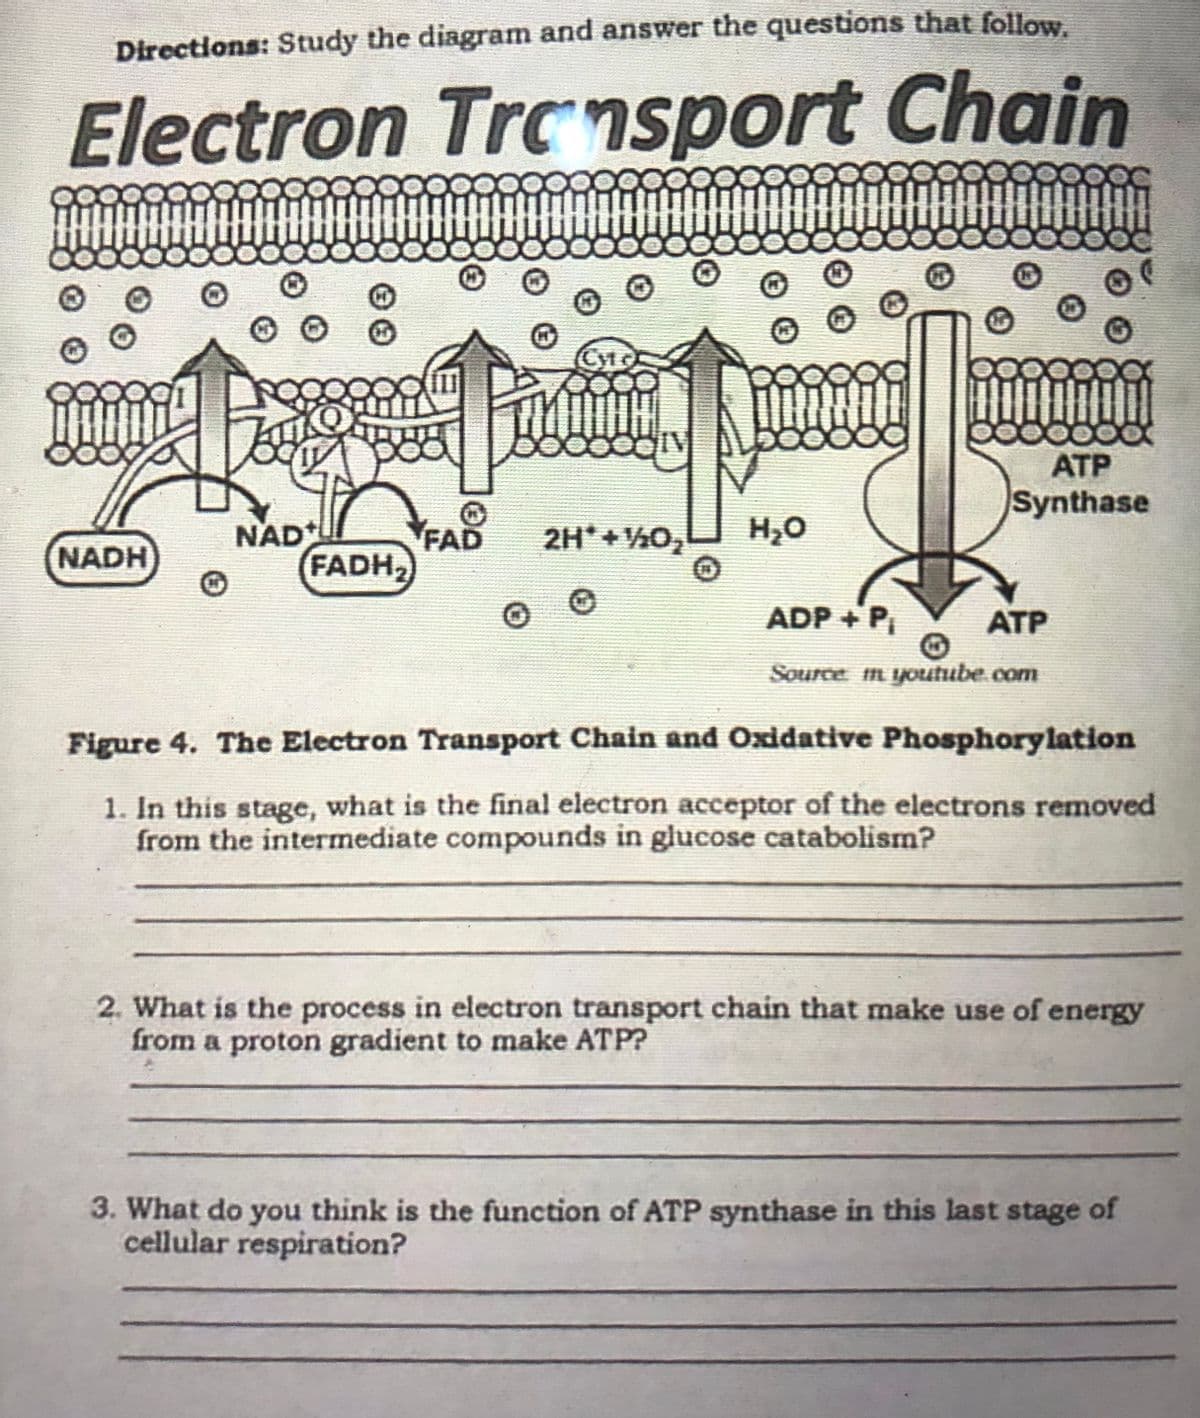 Directions: Study the diagram and answer the questions that follow
Electron Trc nsport Chain
Cyt c
ATP
Synthase
NAD
FADH
2H +%0,
H,O
FAD
NADH
ADP + P,
ATP
Source m youtube.com
Figure 4. The Electron Transport Chain and Oxidative Phosphorylation
1. In this stage, what is the final electron acceptor of the electrons removed
from the intermediate compounds in glucose catabolism?
2. What is the process in electron transport chain that make use of energy
from a proton gradient to make ATP?
3. What do you think is the function of ATP synthase in this last stage of
cellular respiration?
